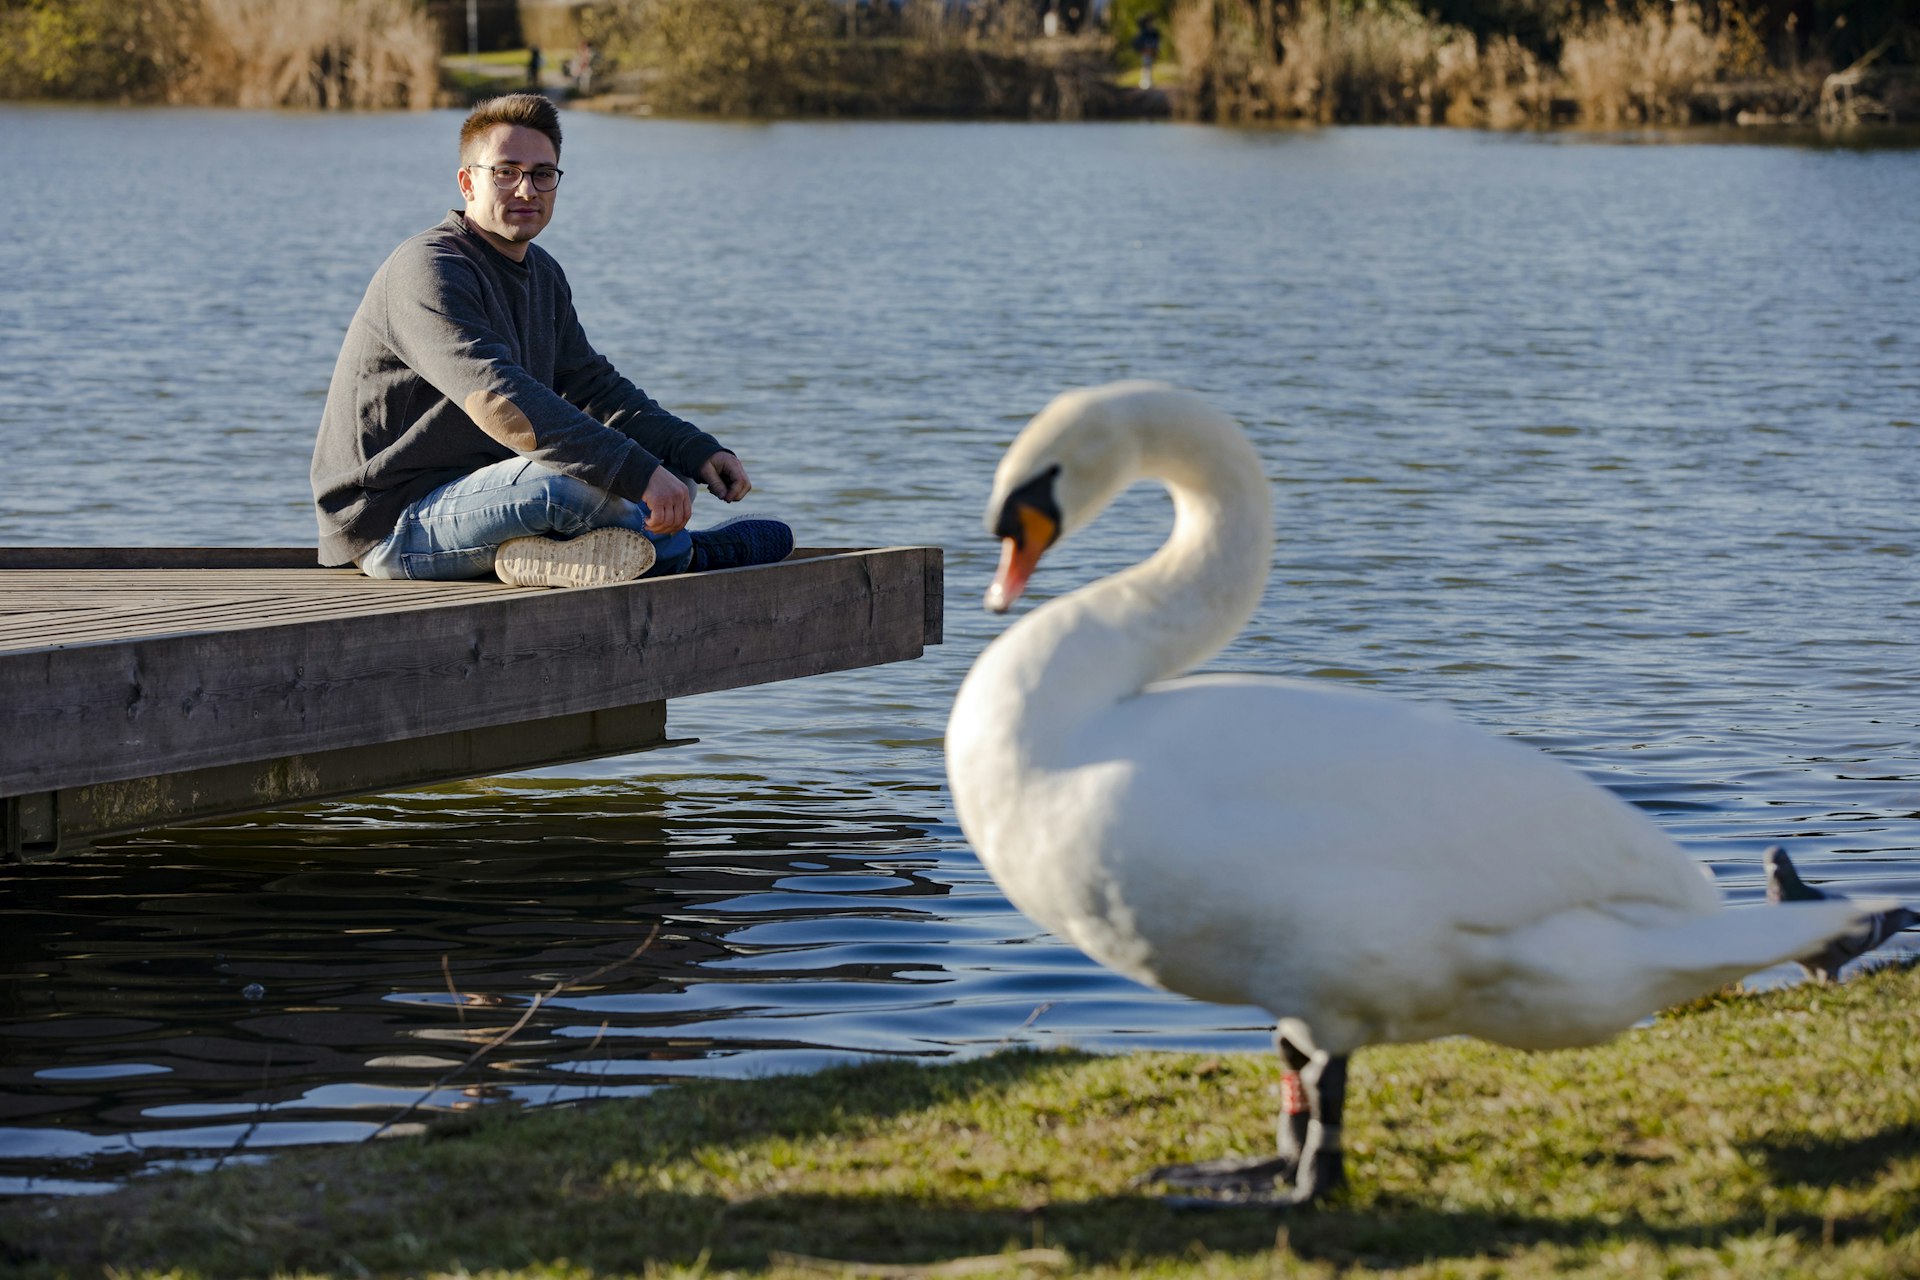 Young Adult Man Relaxing By a Lake and Watching a Swan